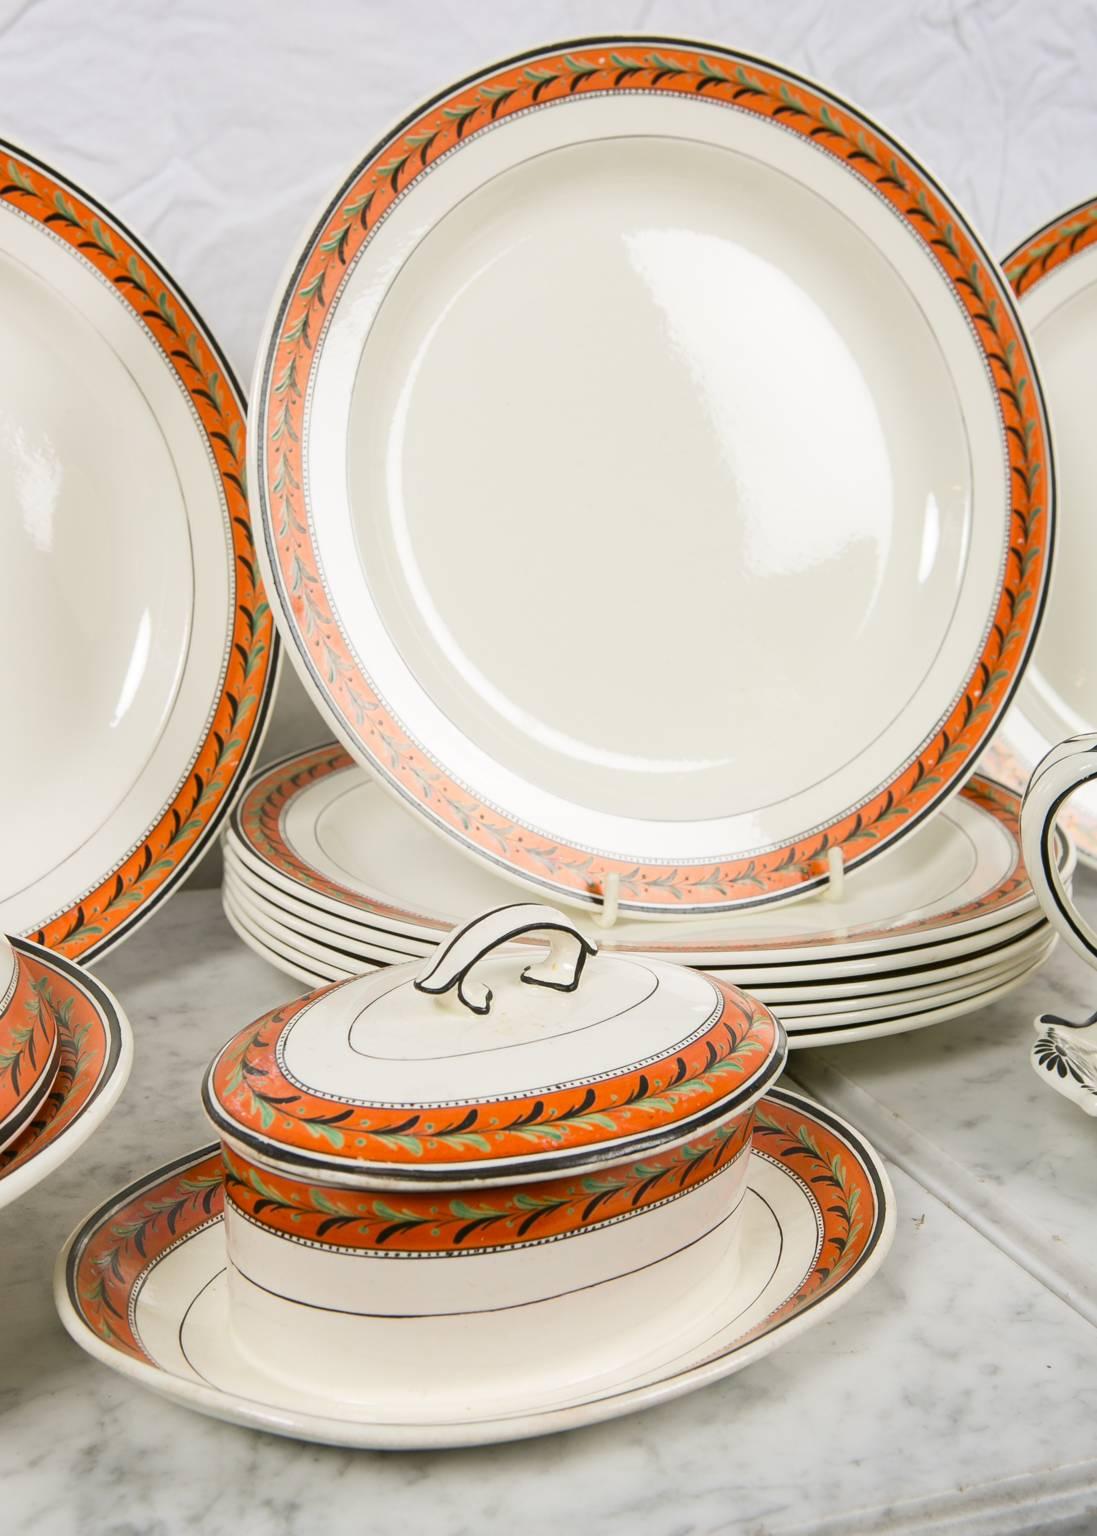 Neoclassical Antique Creamware Set of Dishes with Orange Borders